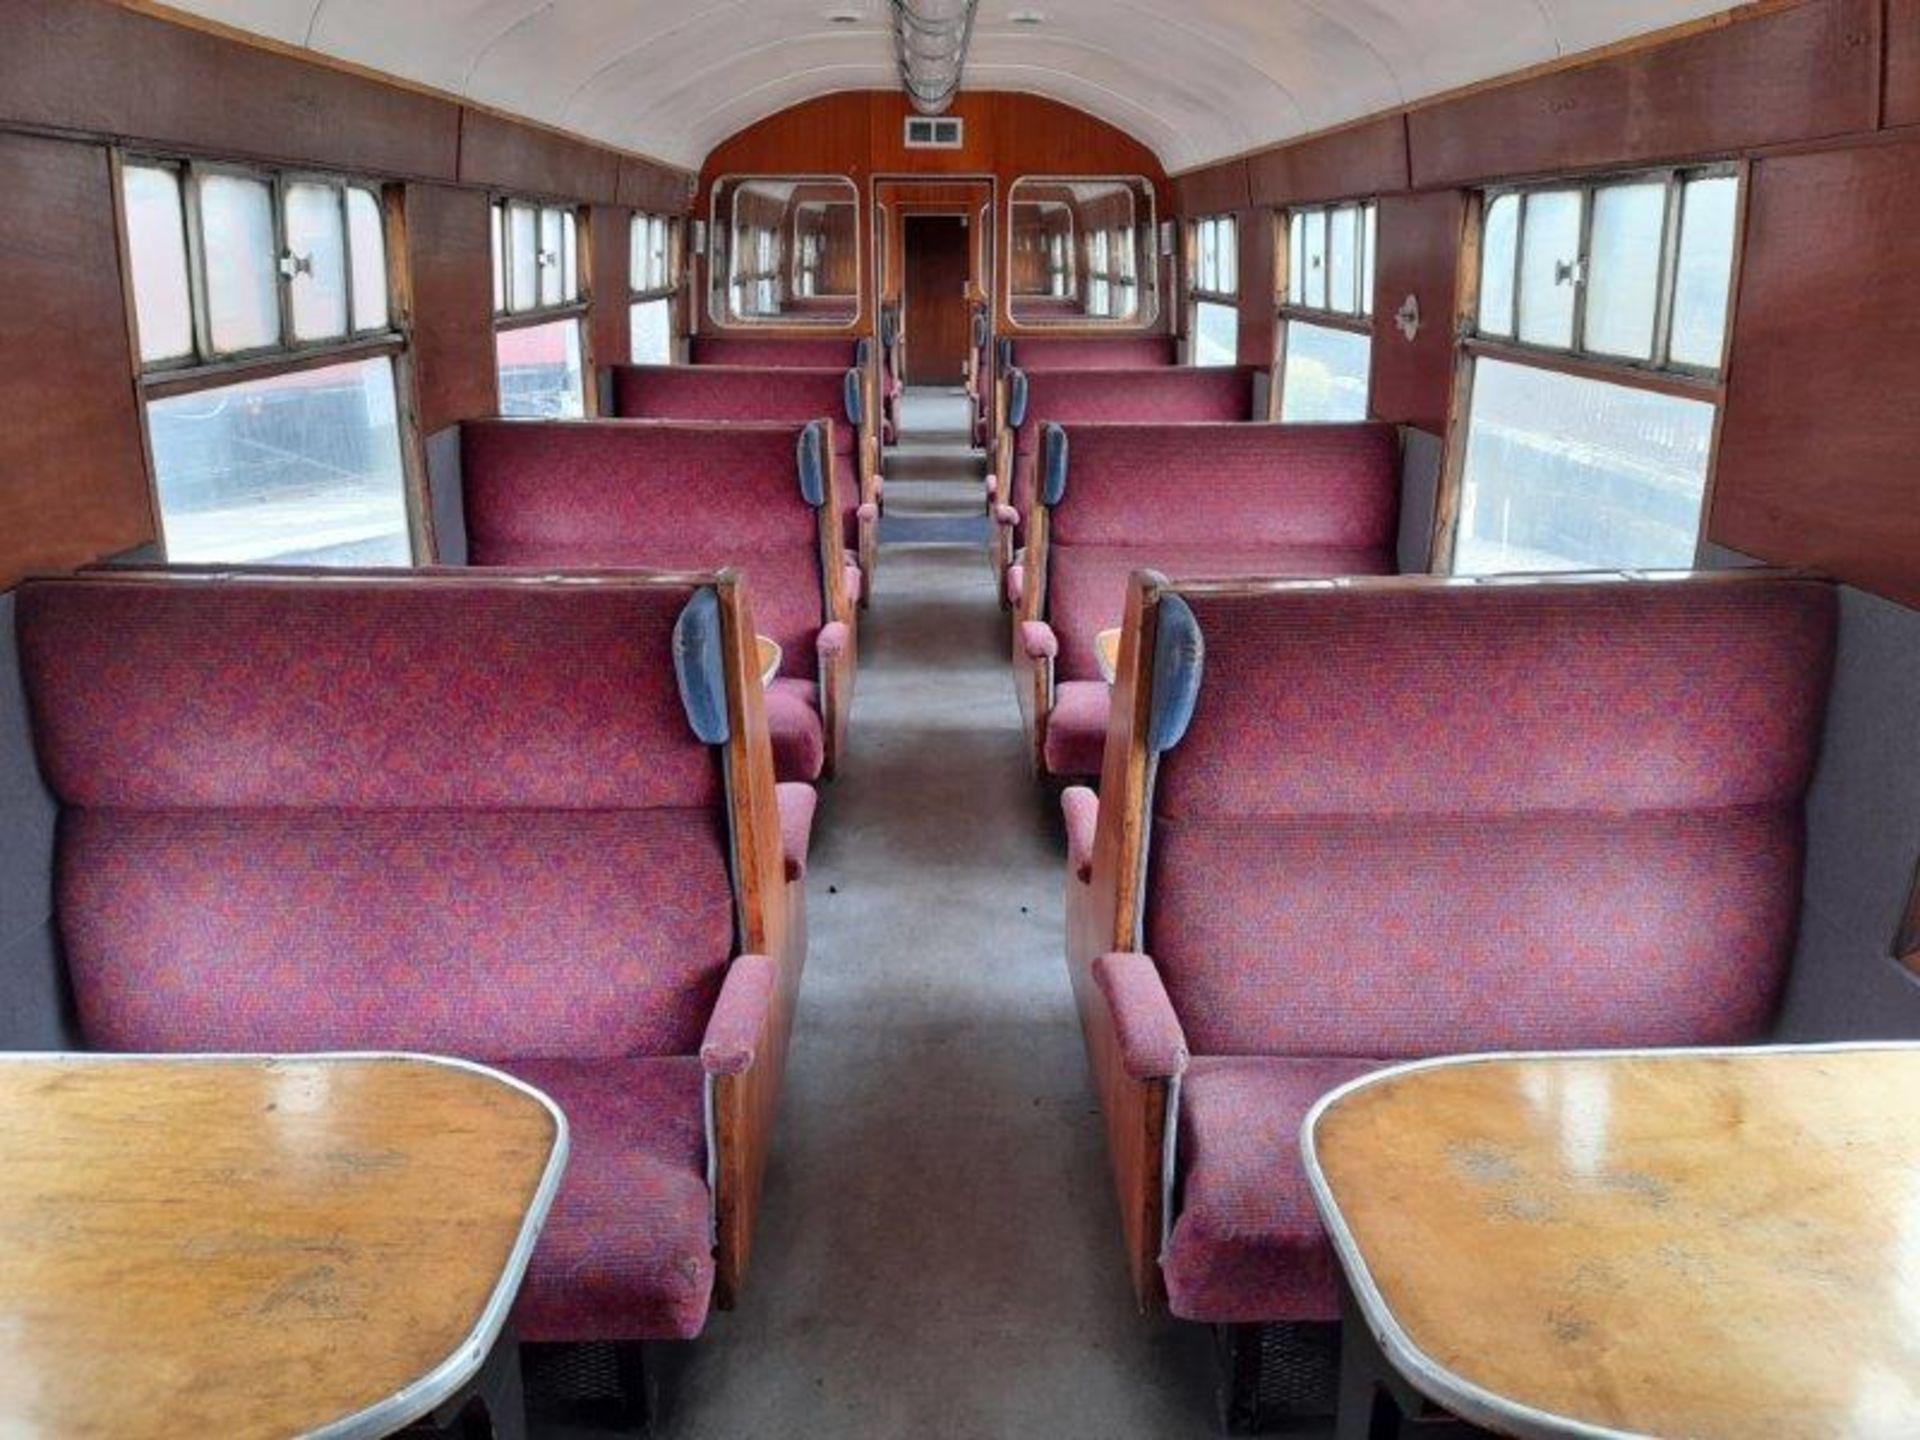 BR Mark 1 type TSO coach, no. M4858, 55-seats and 2 bench seats in red/ purple moquette, carmine and - Image 8 of 14